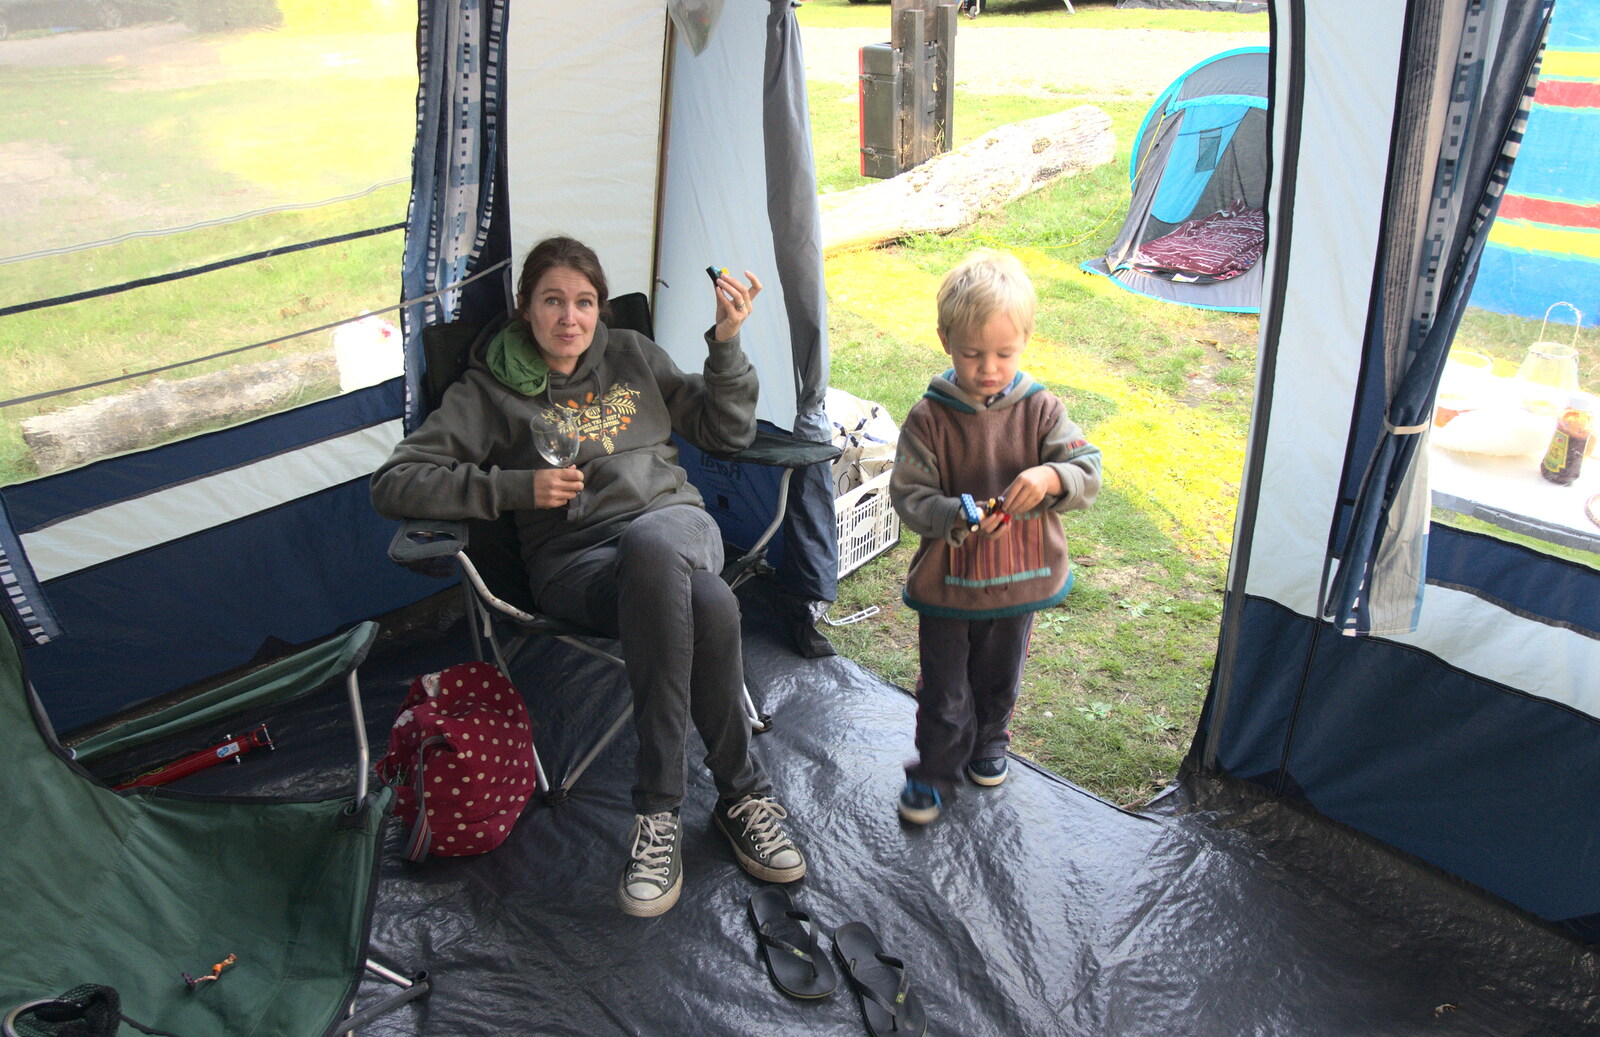 Isobel and Harry in the awning from The Archaeology of Dunwich: A Camping Trip, Dunwich, Suffolk - 1st August 2015